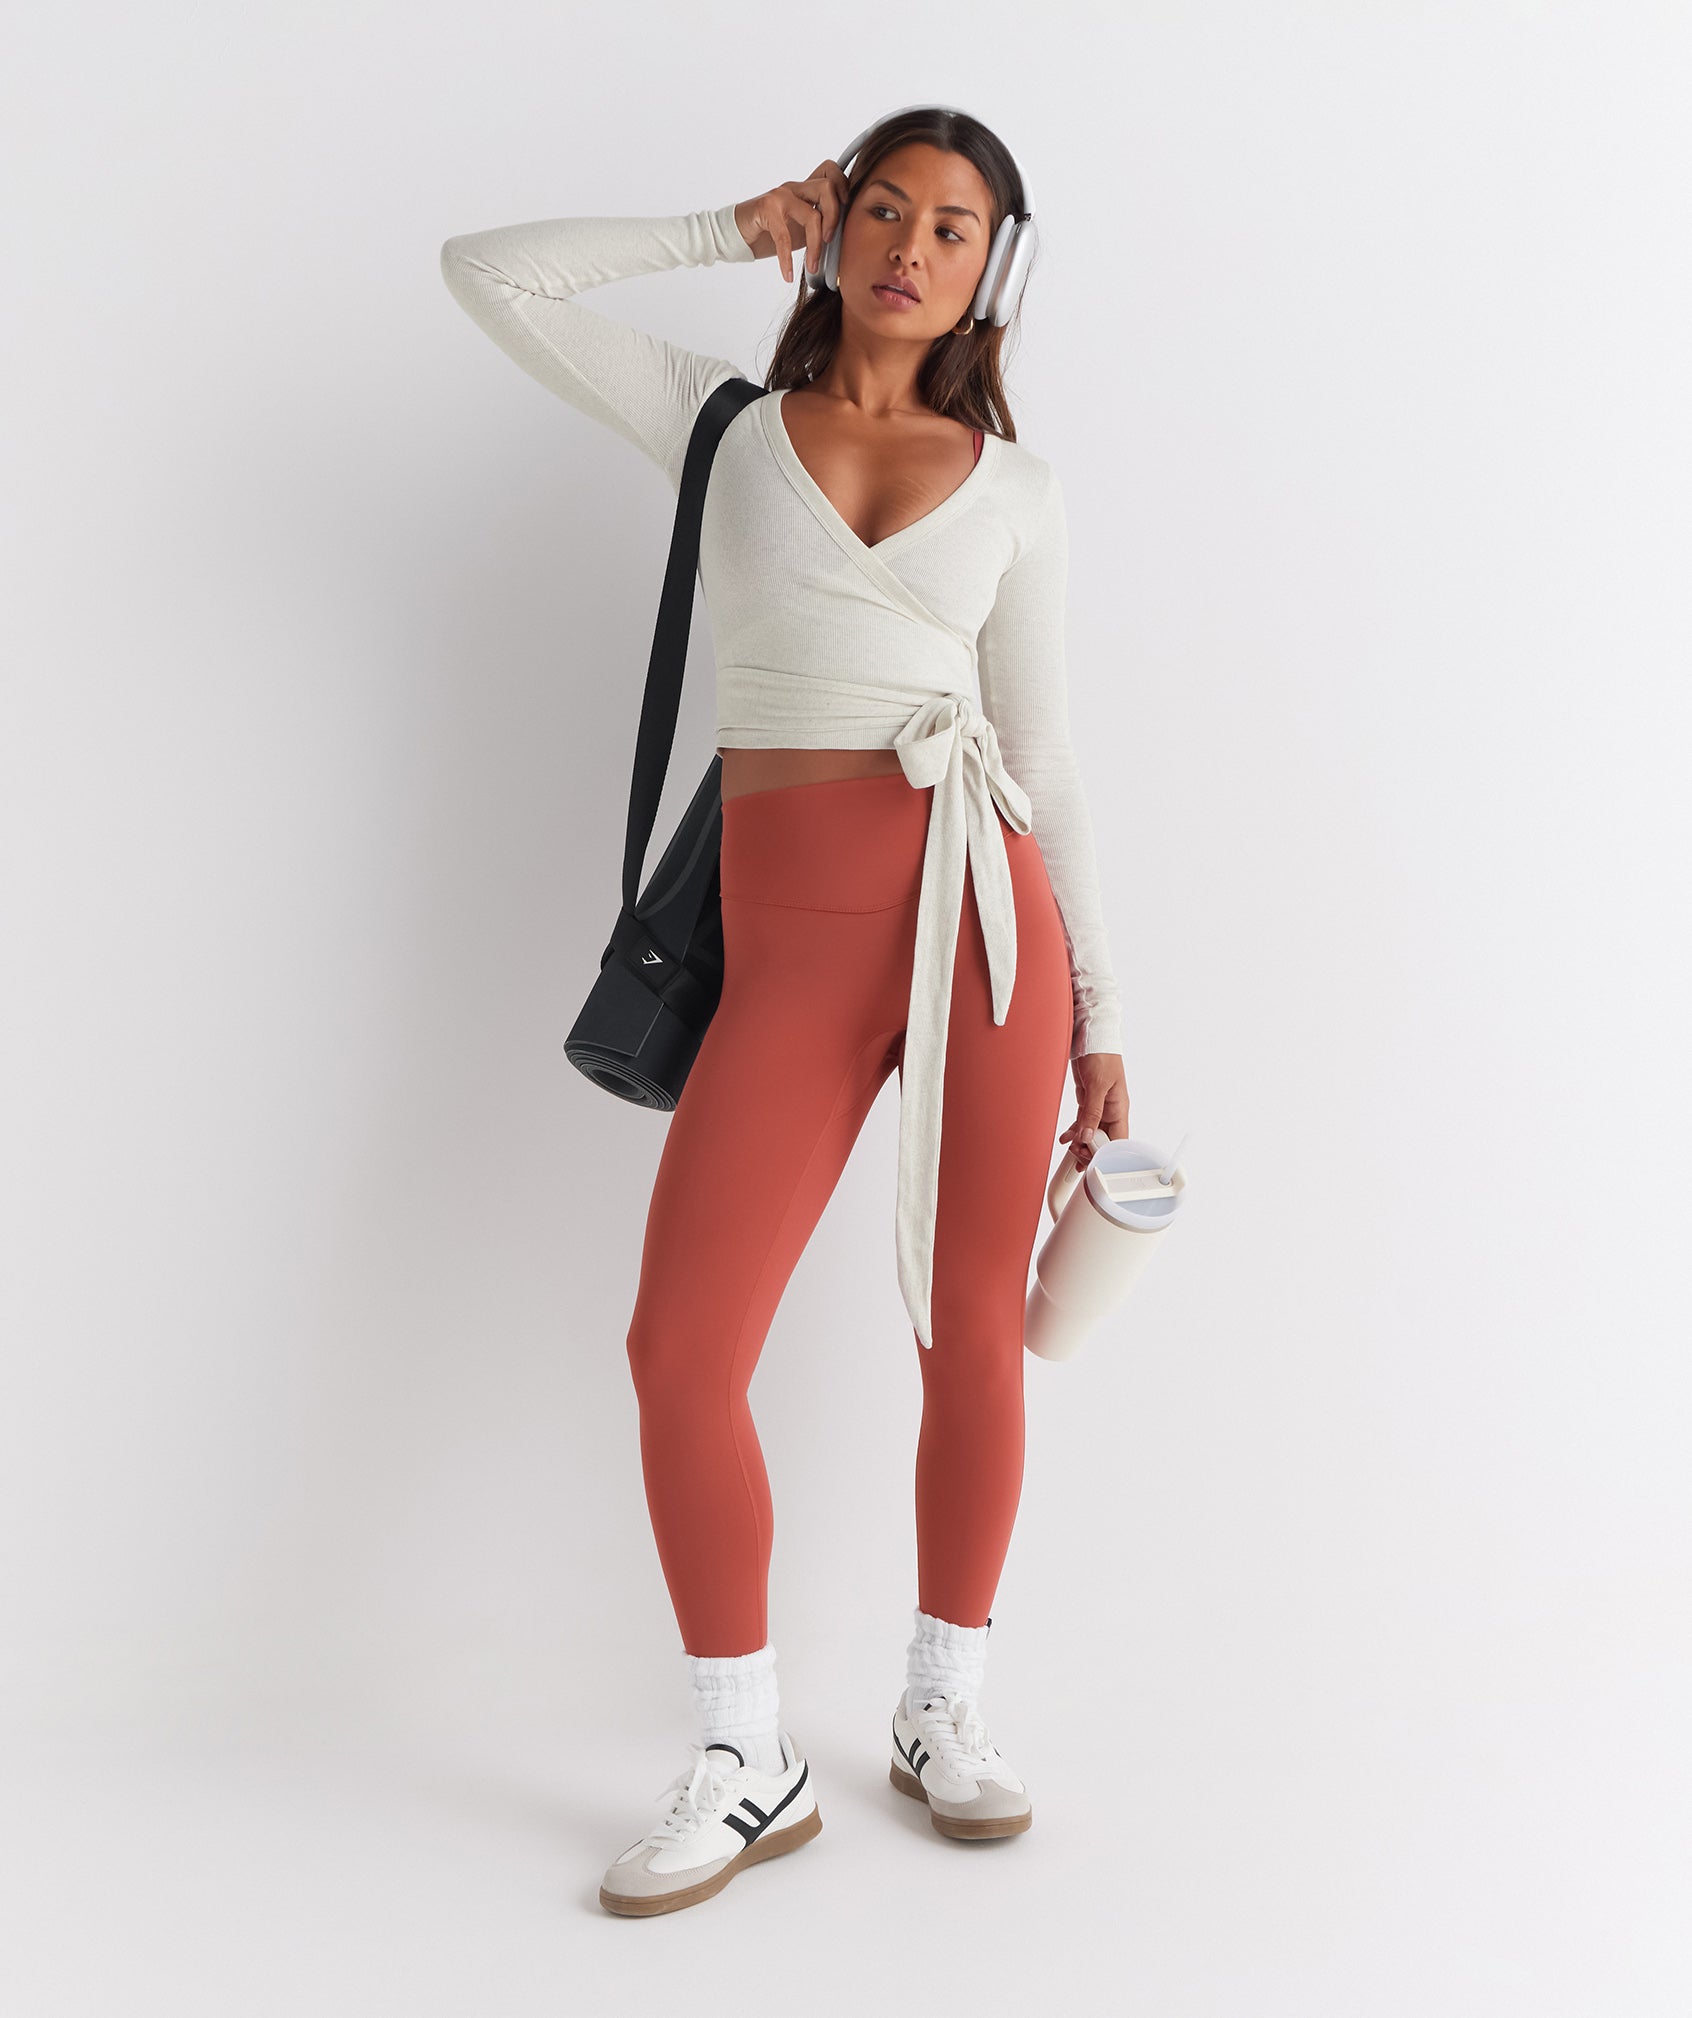 Elevate Wrap Long Sleeve Top in Frost White Marl - view 4